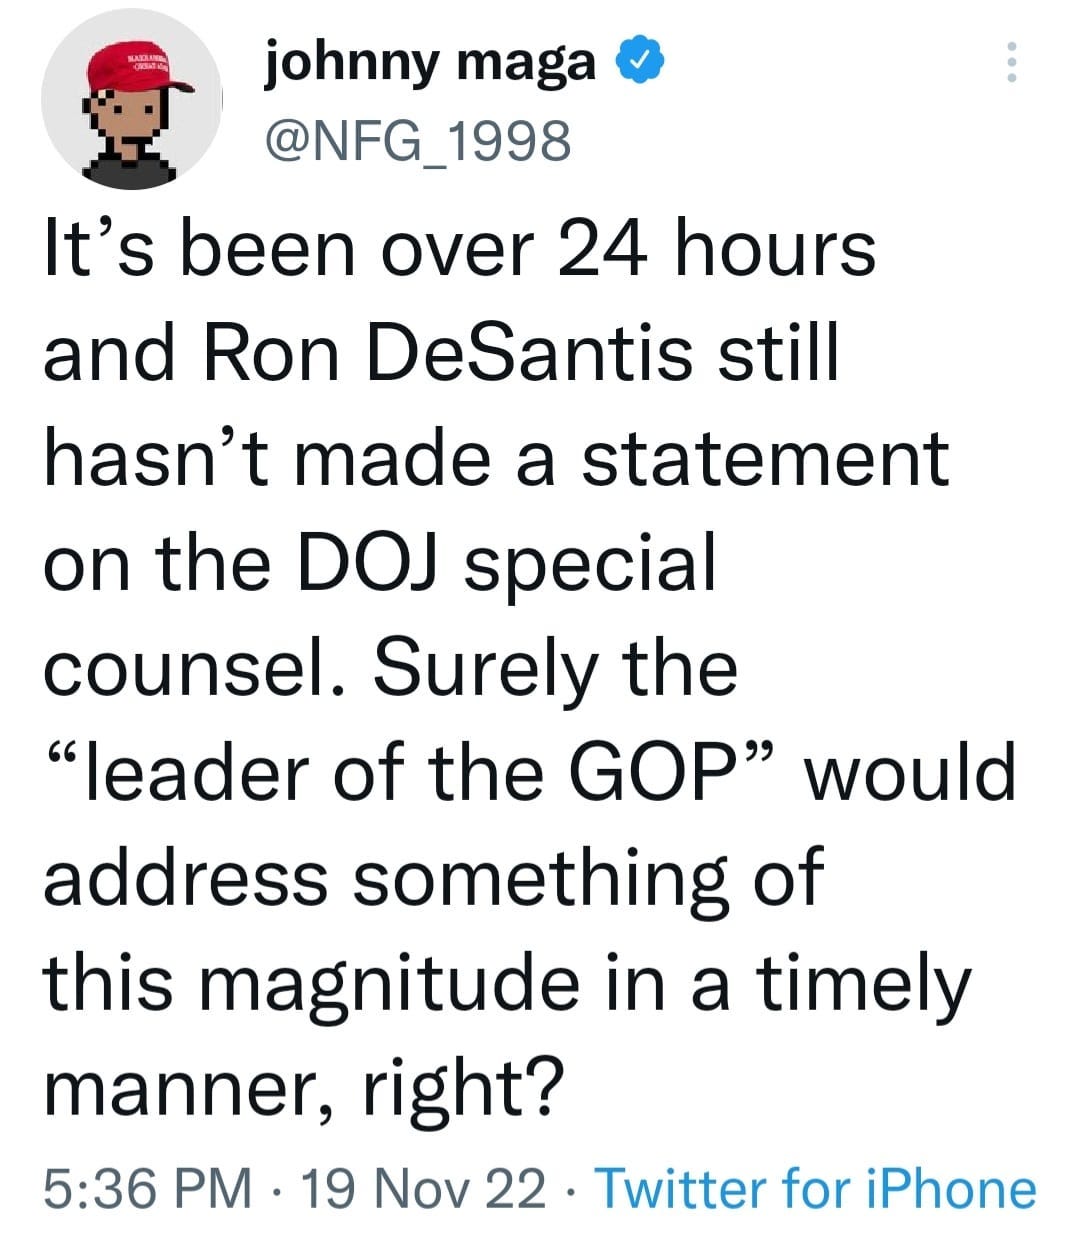 May be an image of text that says 'johnny maga @NFG_1998 It's been over 24 hours and Ron DeSantis still hasn't made a statement on the DOJ special counsel. Surely the "leader of the GOP" would address something of this magnitude in a timely manner, right? 5:36 PM 19 Nov 22 Twitter for iPhone'